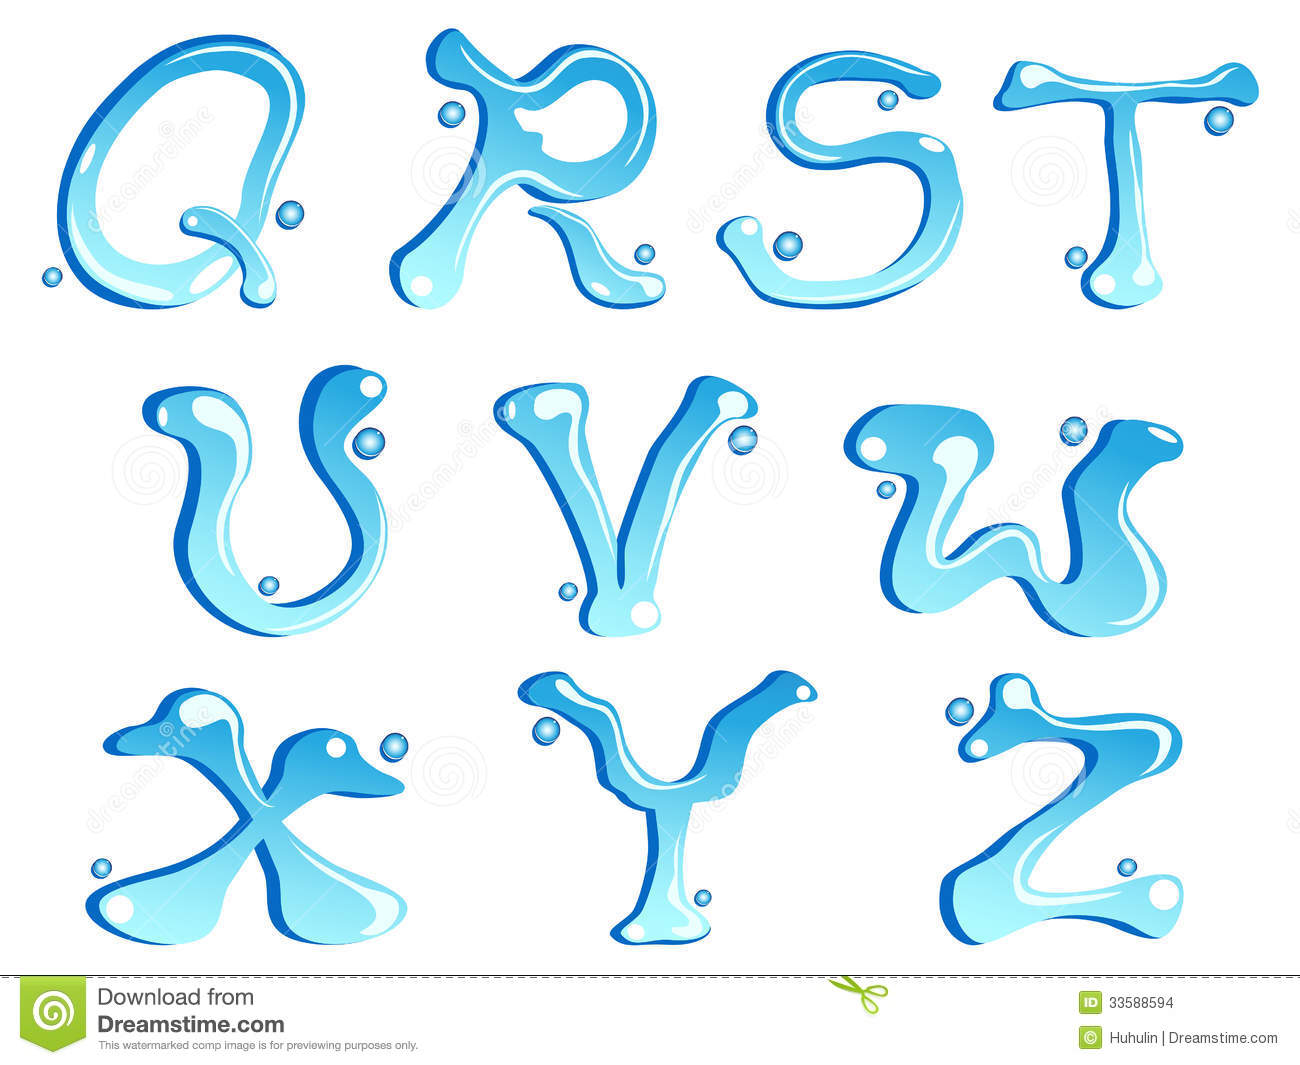 14 Water Like Font Images